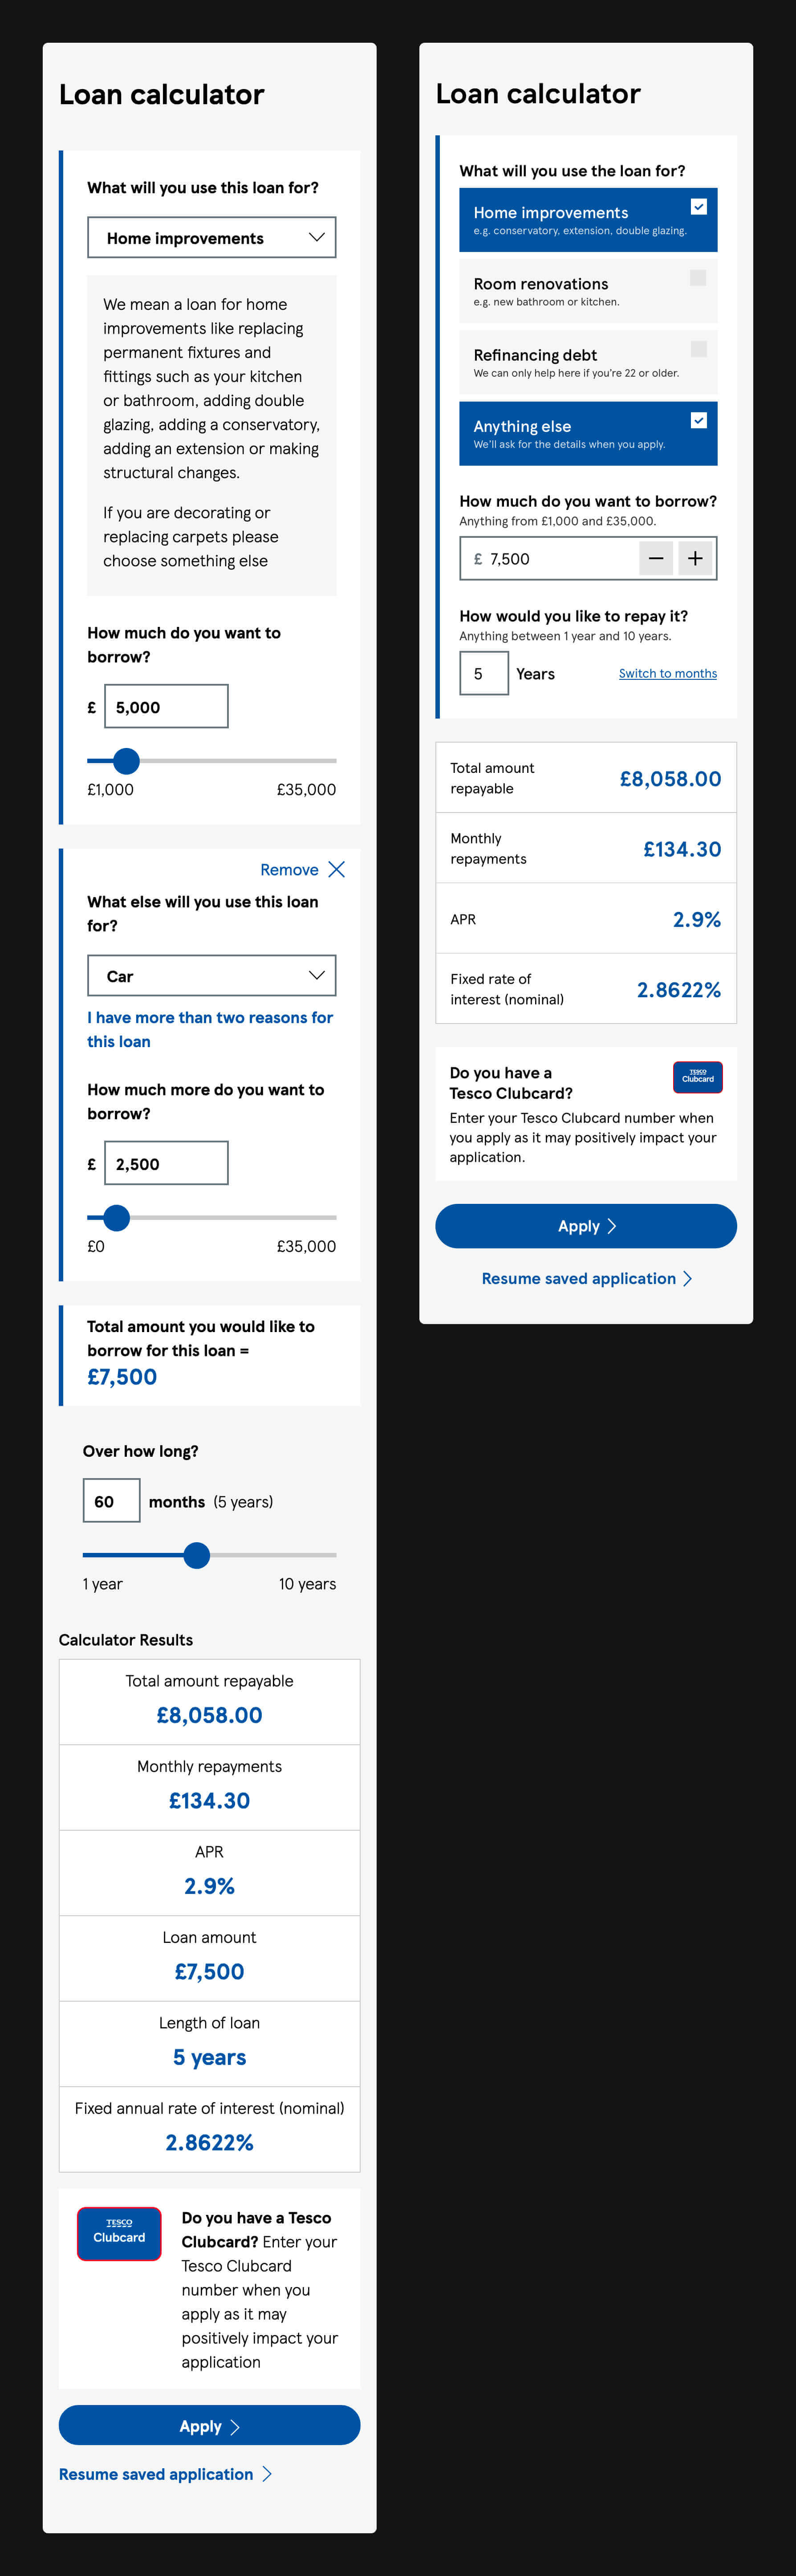 A side-by-side comparison of the loan calculator displayed as it is today and my updated mockup.